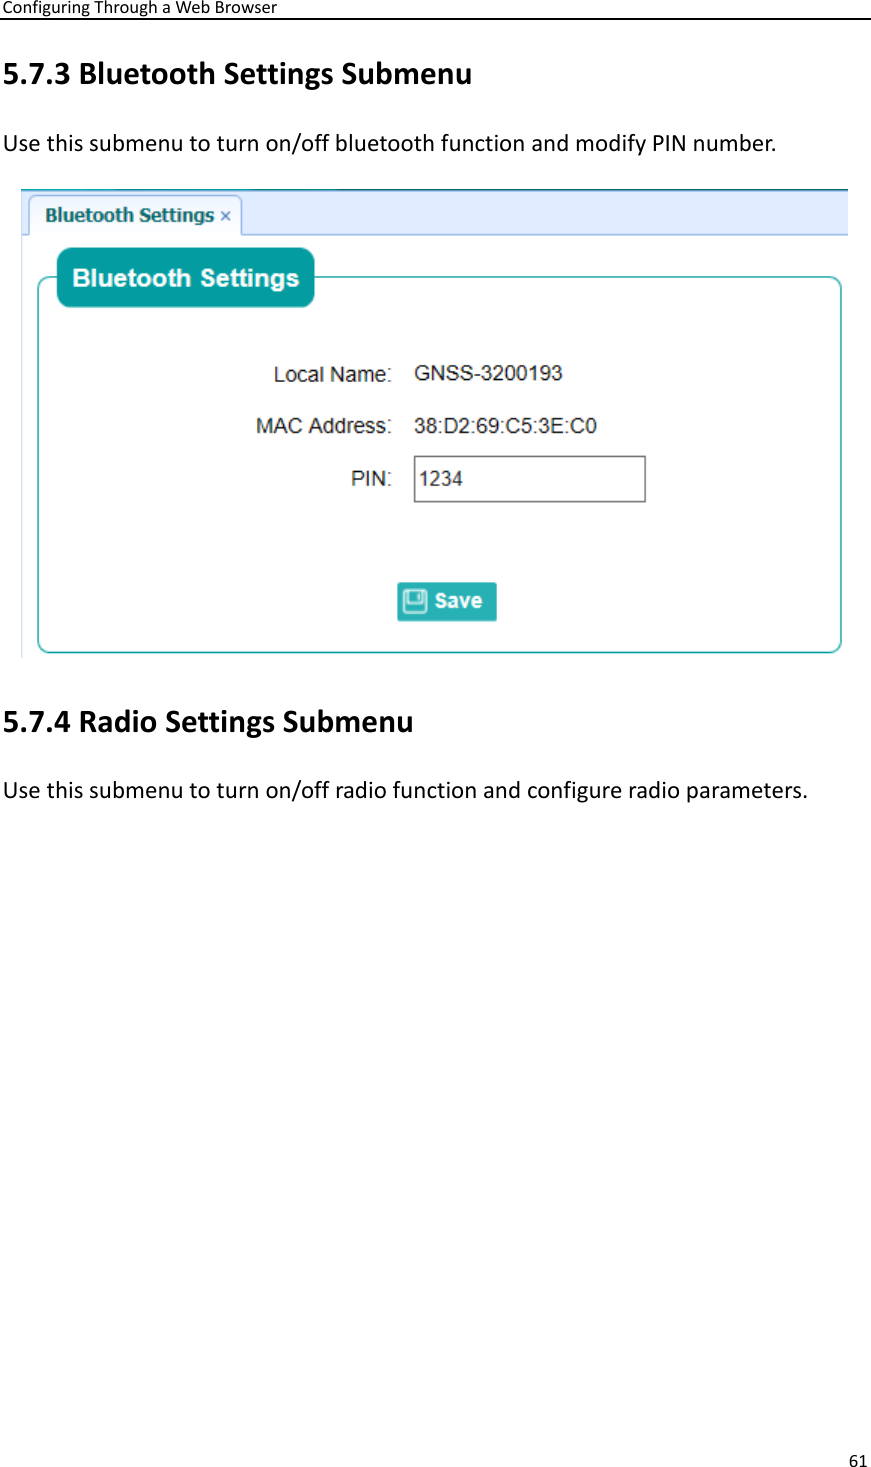 Configuring Through a Web Browser 61  5.7.3 Bluetooth Settings Submenu   Use this submenu to turn on/off bluetooth function and modify PIN number.   5.7.4 Radio Settings Submenu   Use this submenu to turn on/off radio function and configure radio parameters. 